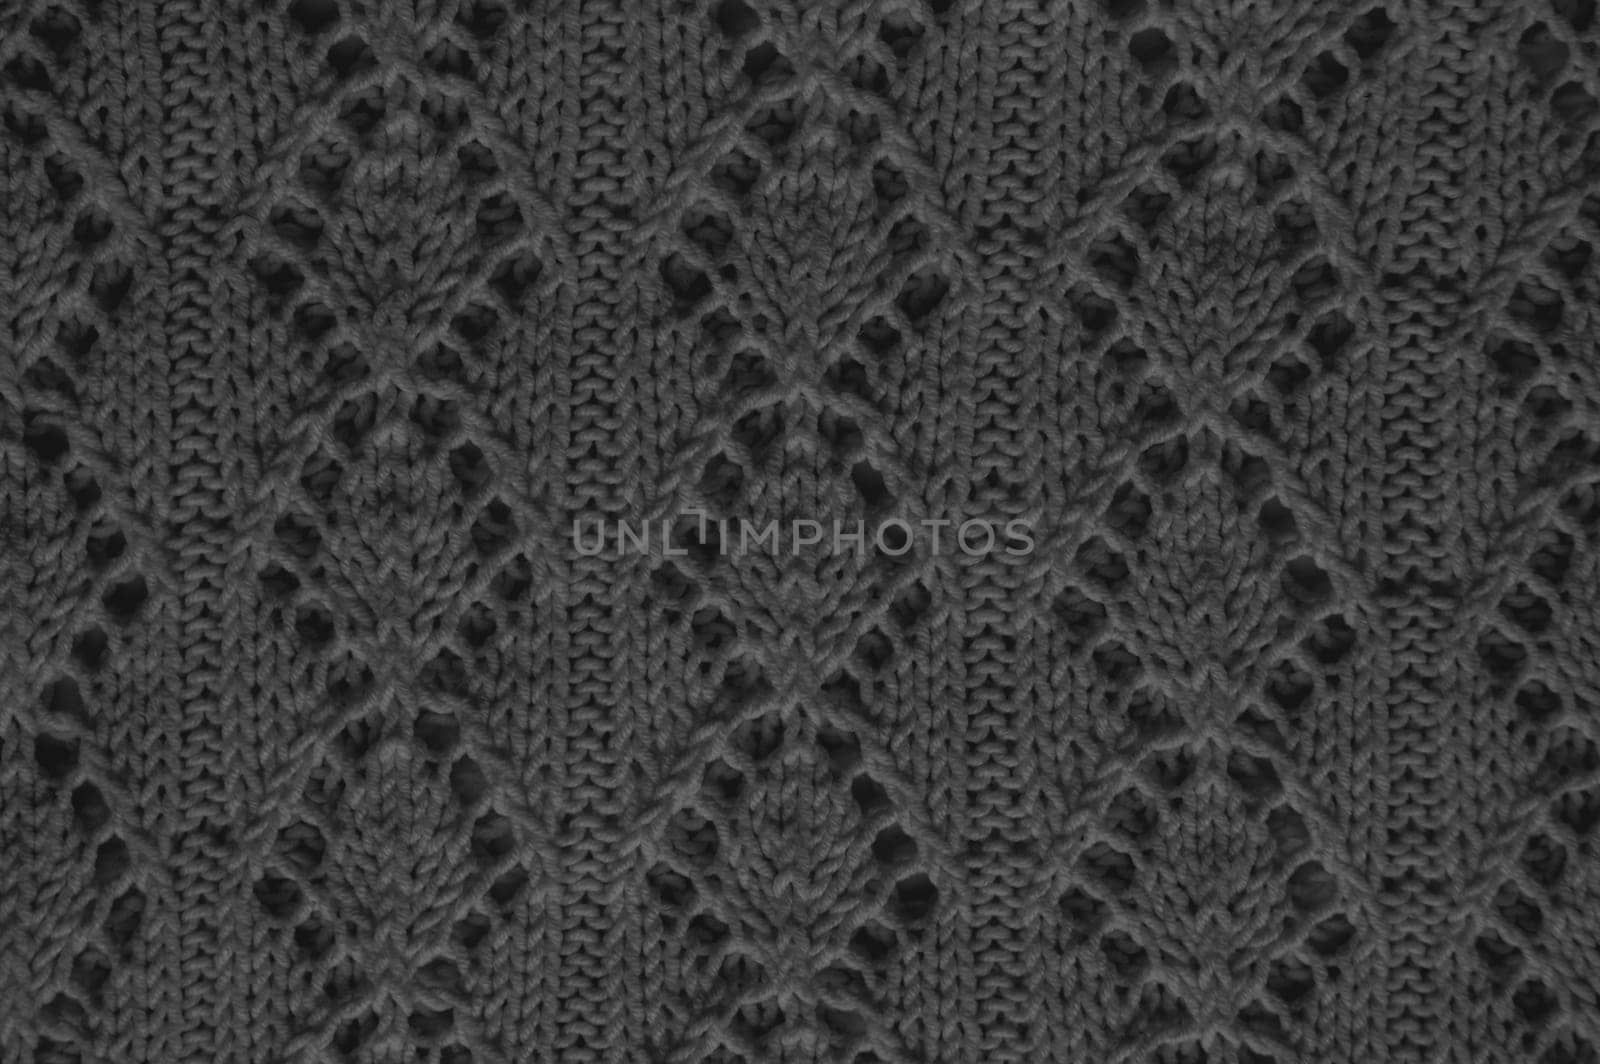 Macro Pattern Knit. Abstract Wool Texture. Weave Jacquard Holiday Background. Closeup Pattern Knit. Dark Structure Thread. Scandinavian Winter Plaid. Cotton Scarf Material. Knitted Print.